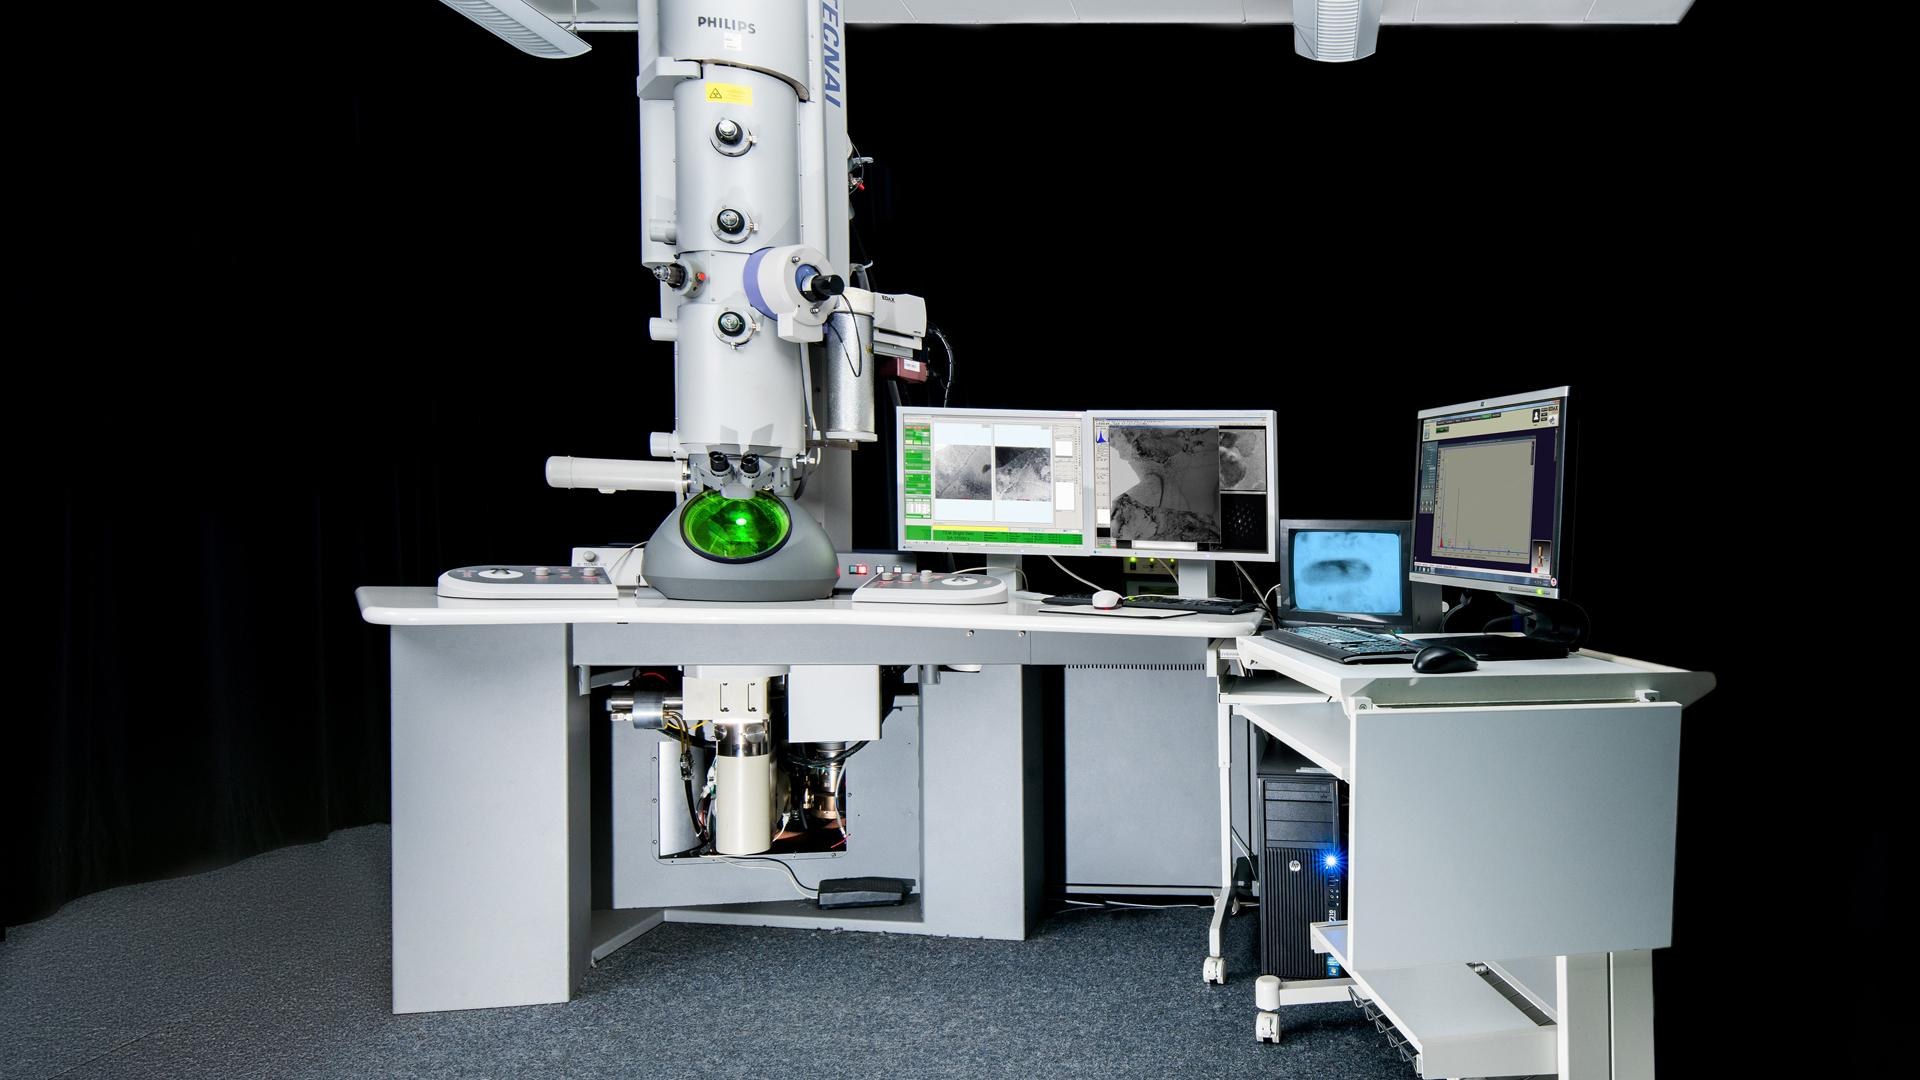 The Philips Tecnai F30 analytical transmission electron microscope at the DLR Institute of Materials Research